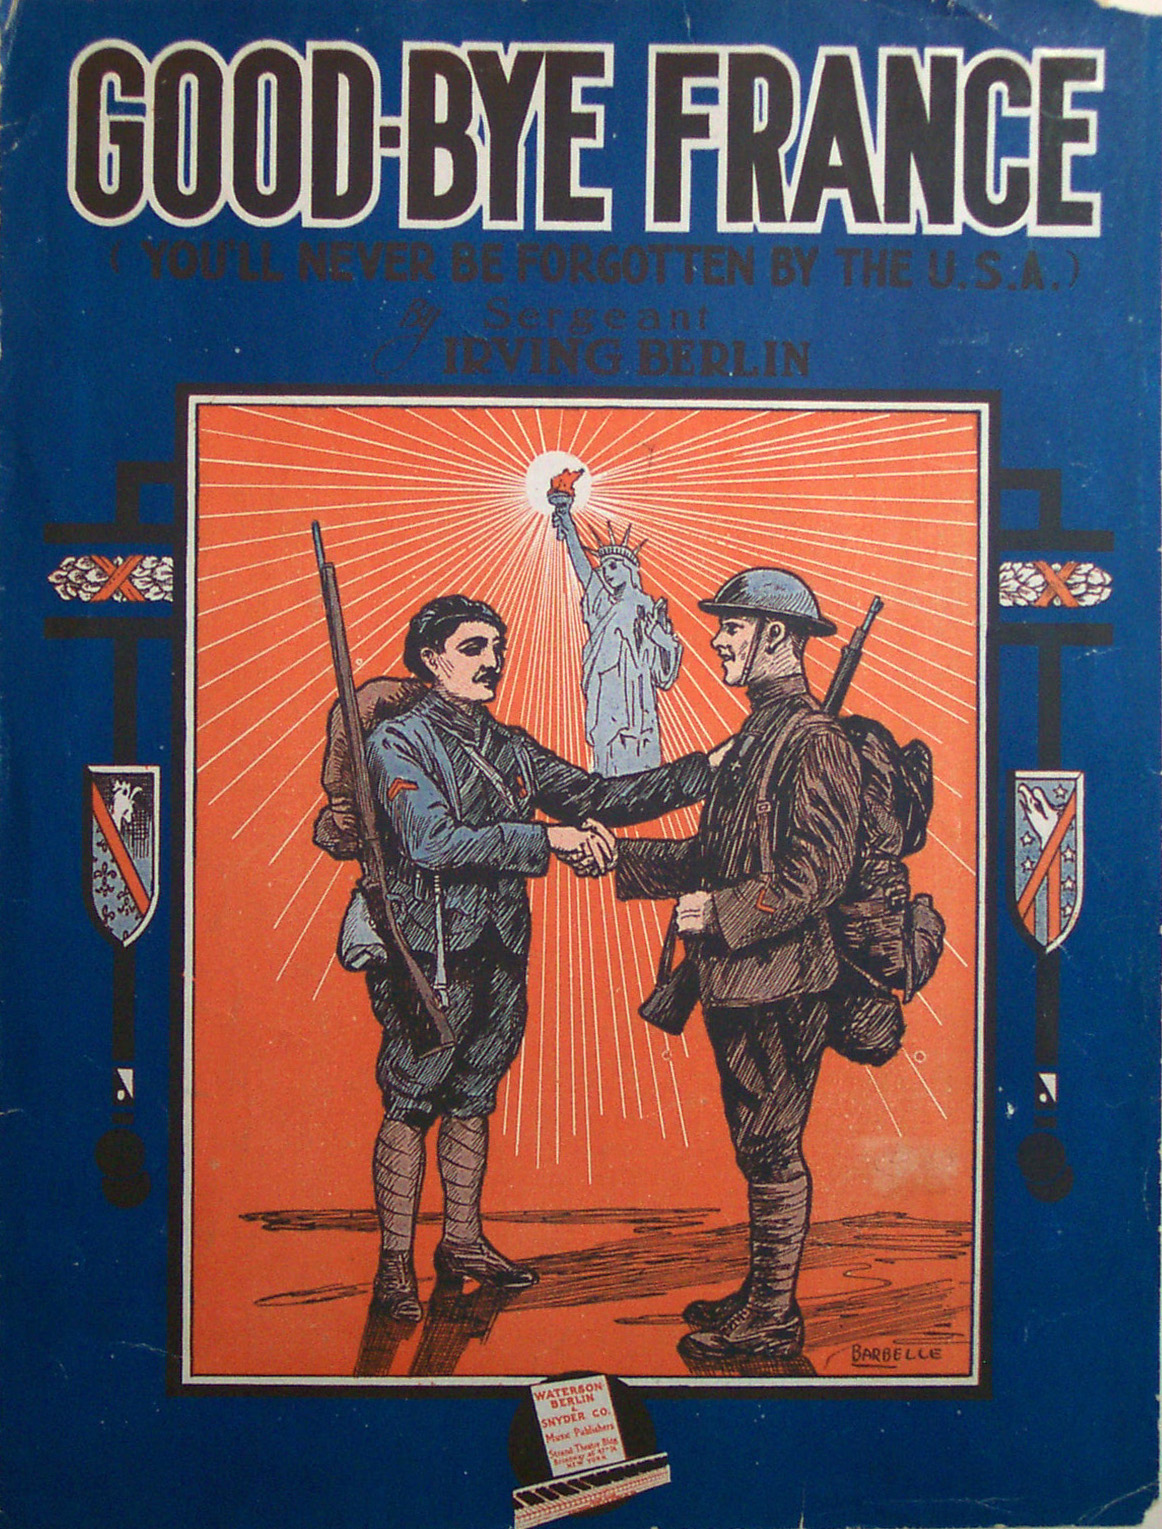 Sheet Music titled Goodbye France. FEATURES DRAWING IN BLUE, ORANGE AND BLACK, OF UNITED STATES AND FRENCH SOLDIERS SHAKING HANDS, STATUE OF LIBERTY IN BACKGROUND. BLUE BORDER WITH NATIONAL SYMBOLS